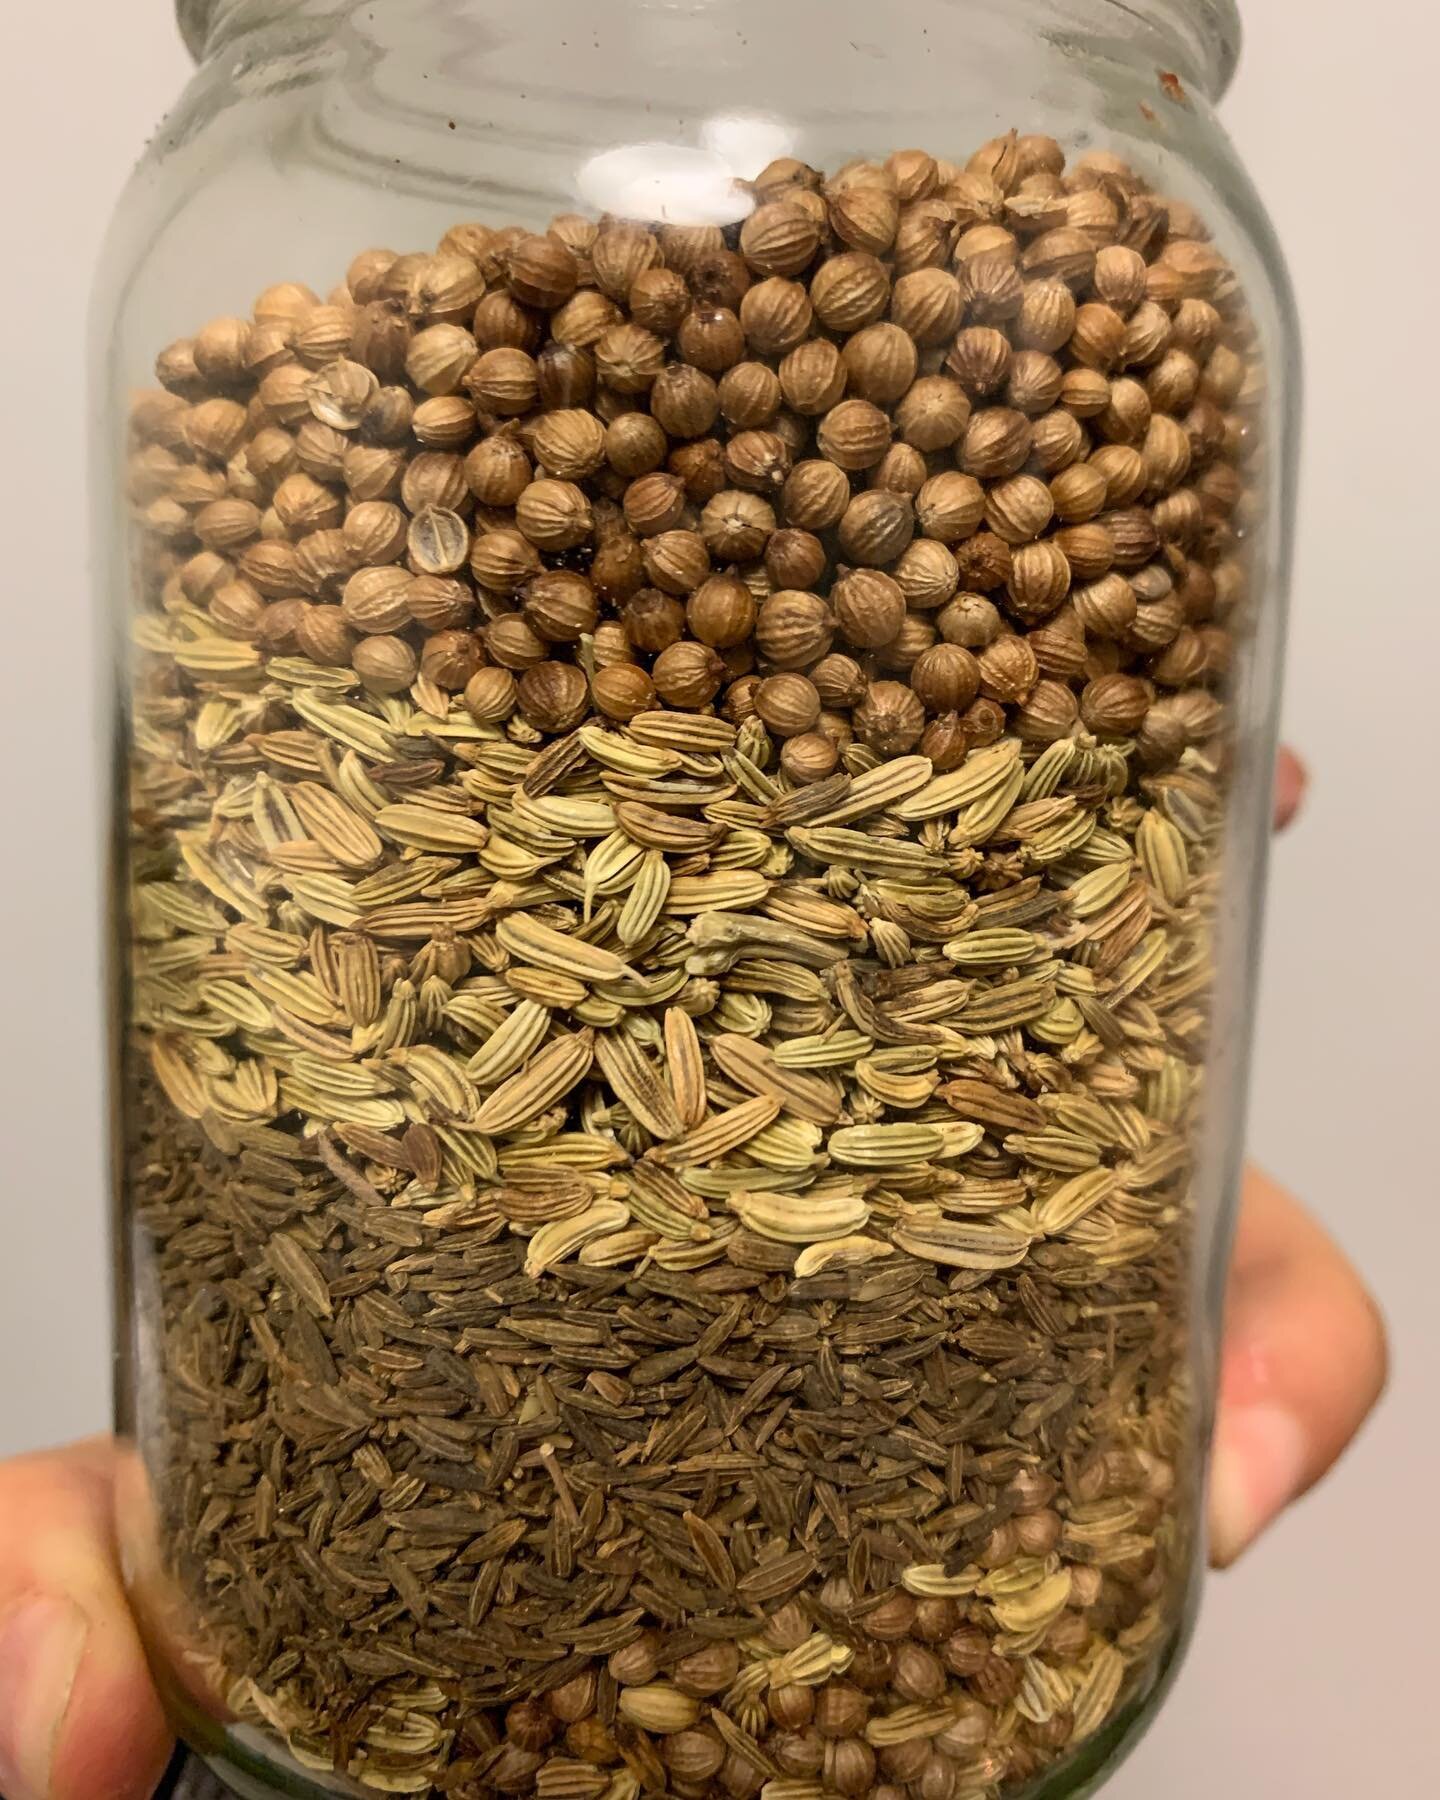 🌱a little something to help lighten the load #springcleaning
☼
&darr; 
DIGESTIVE TEA
1/4 tsp Coriander Seed
1/4 tsp Fennel Seed
1/4 tsp Cumin Seed
&darr;
Directions:
1. Steep seeds in 8oz of boiling water for 5 min
2. Strain and sip after meals
☼
#t